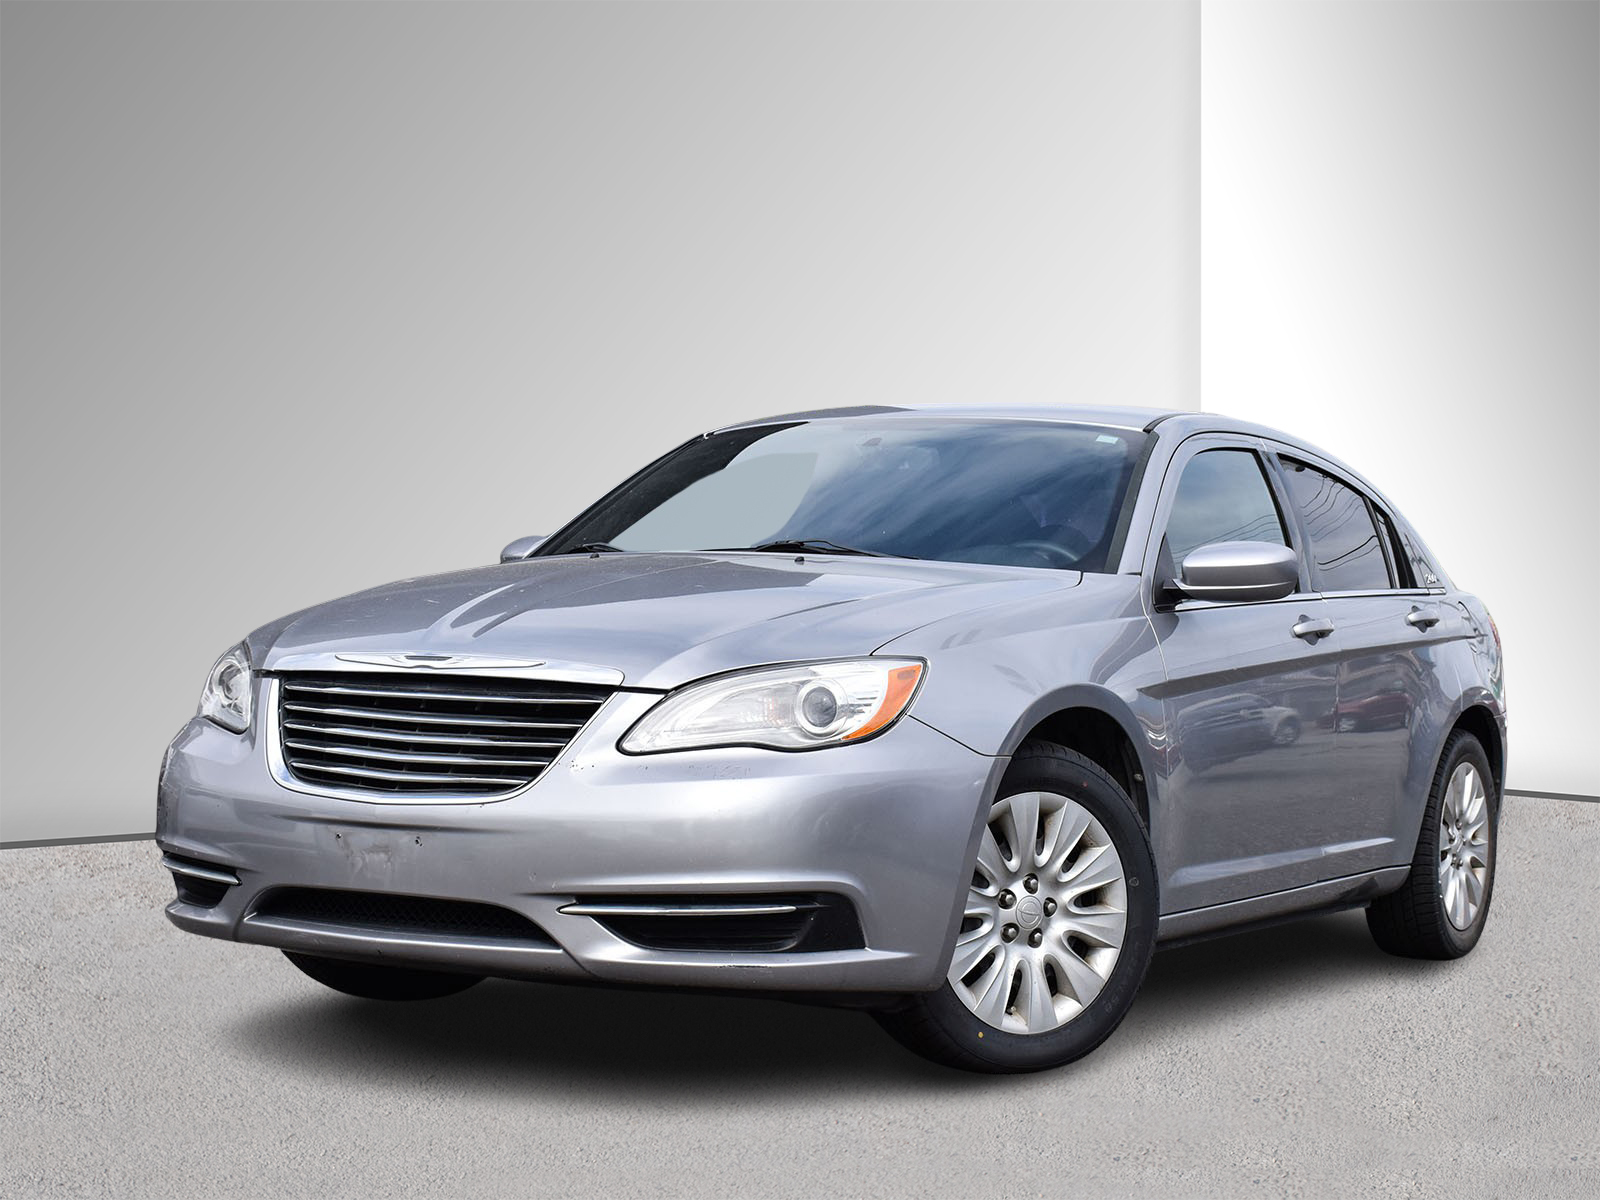 2013 Chrysler 200 LX - BlueTooth, Air Conditioning, Cruise Control